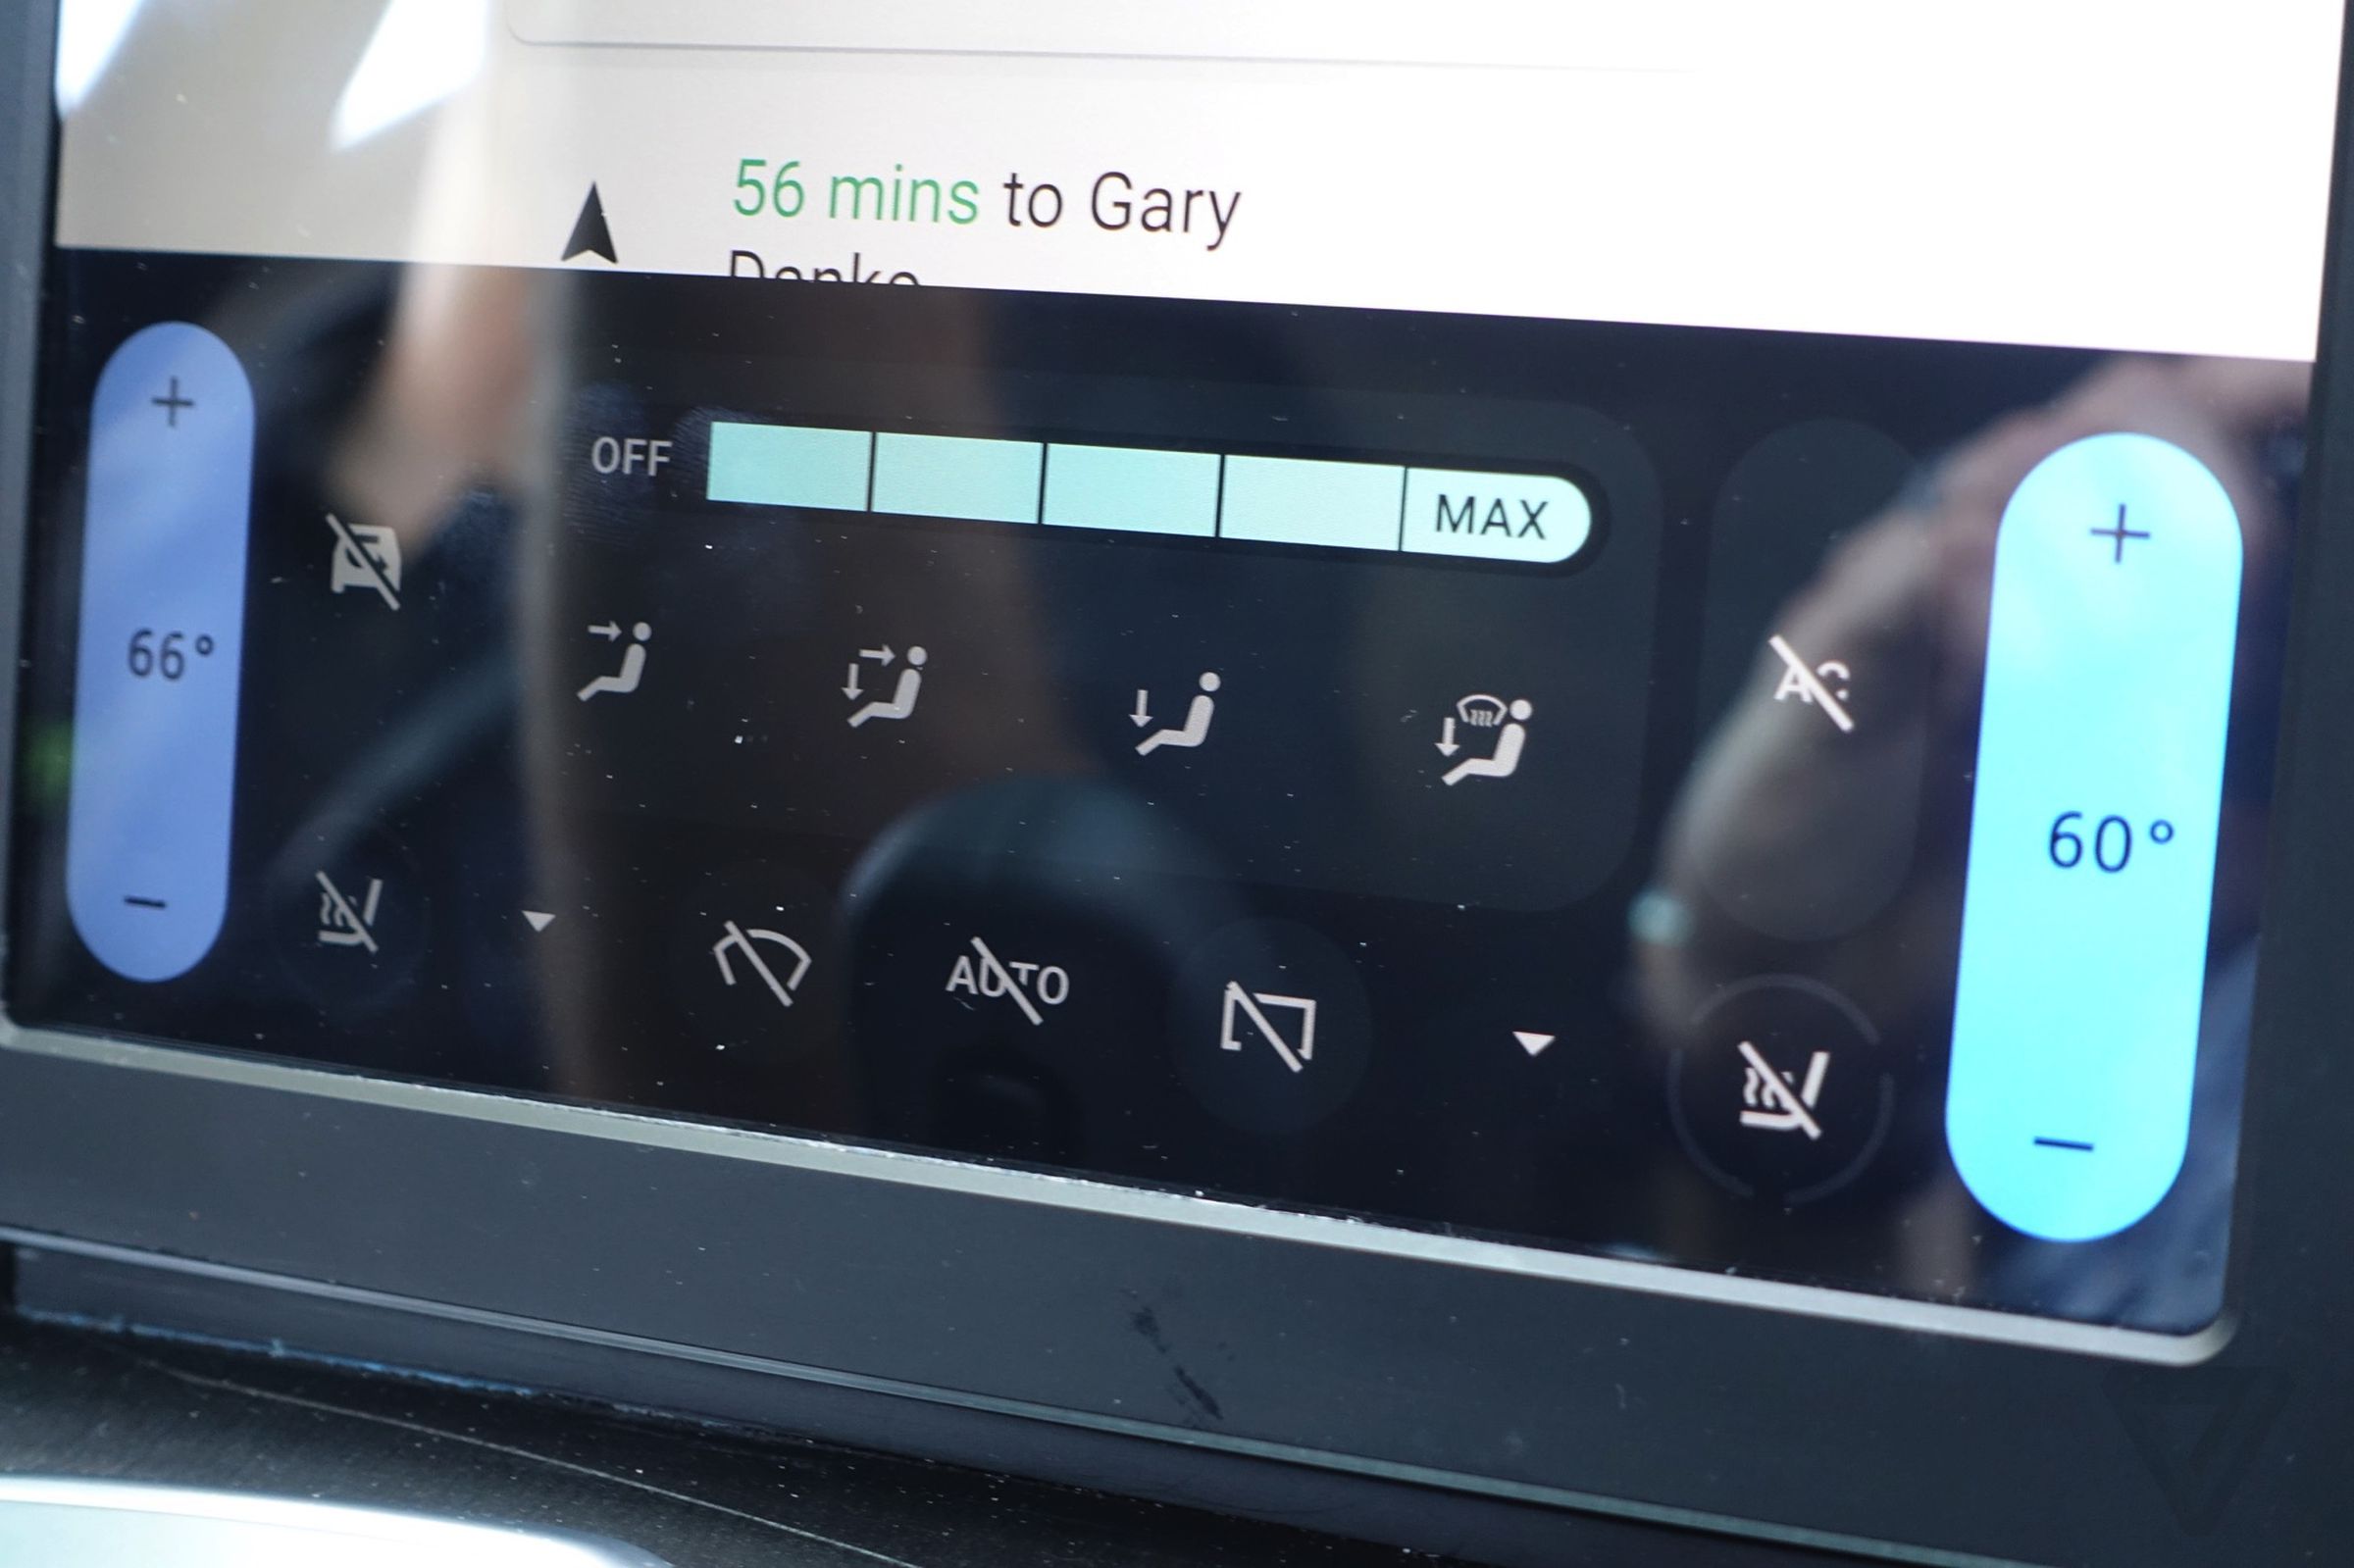 Android N in a Maserati Photos